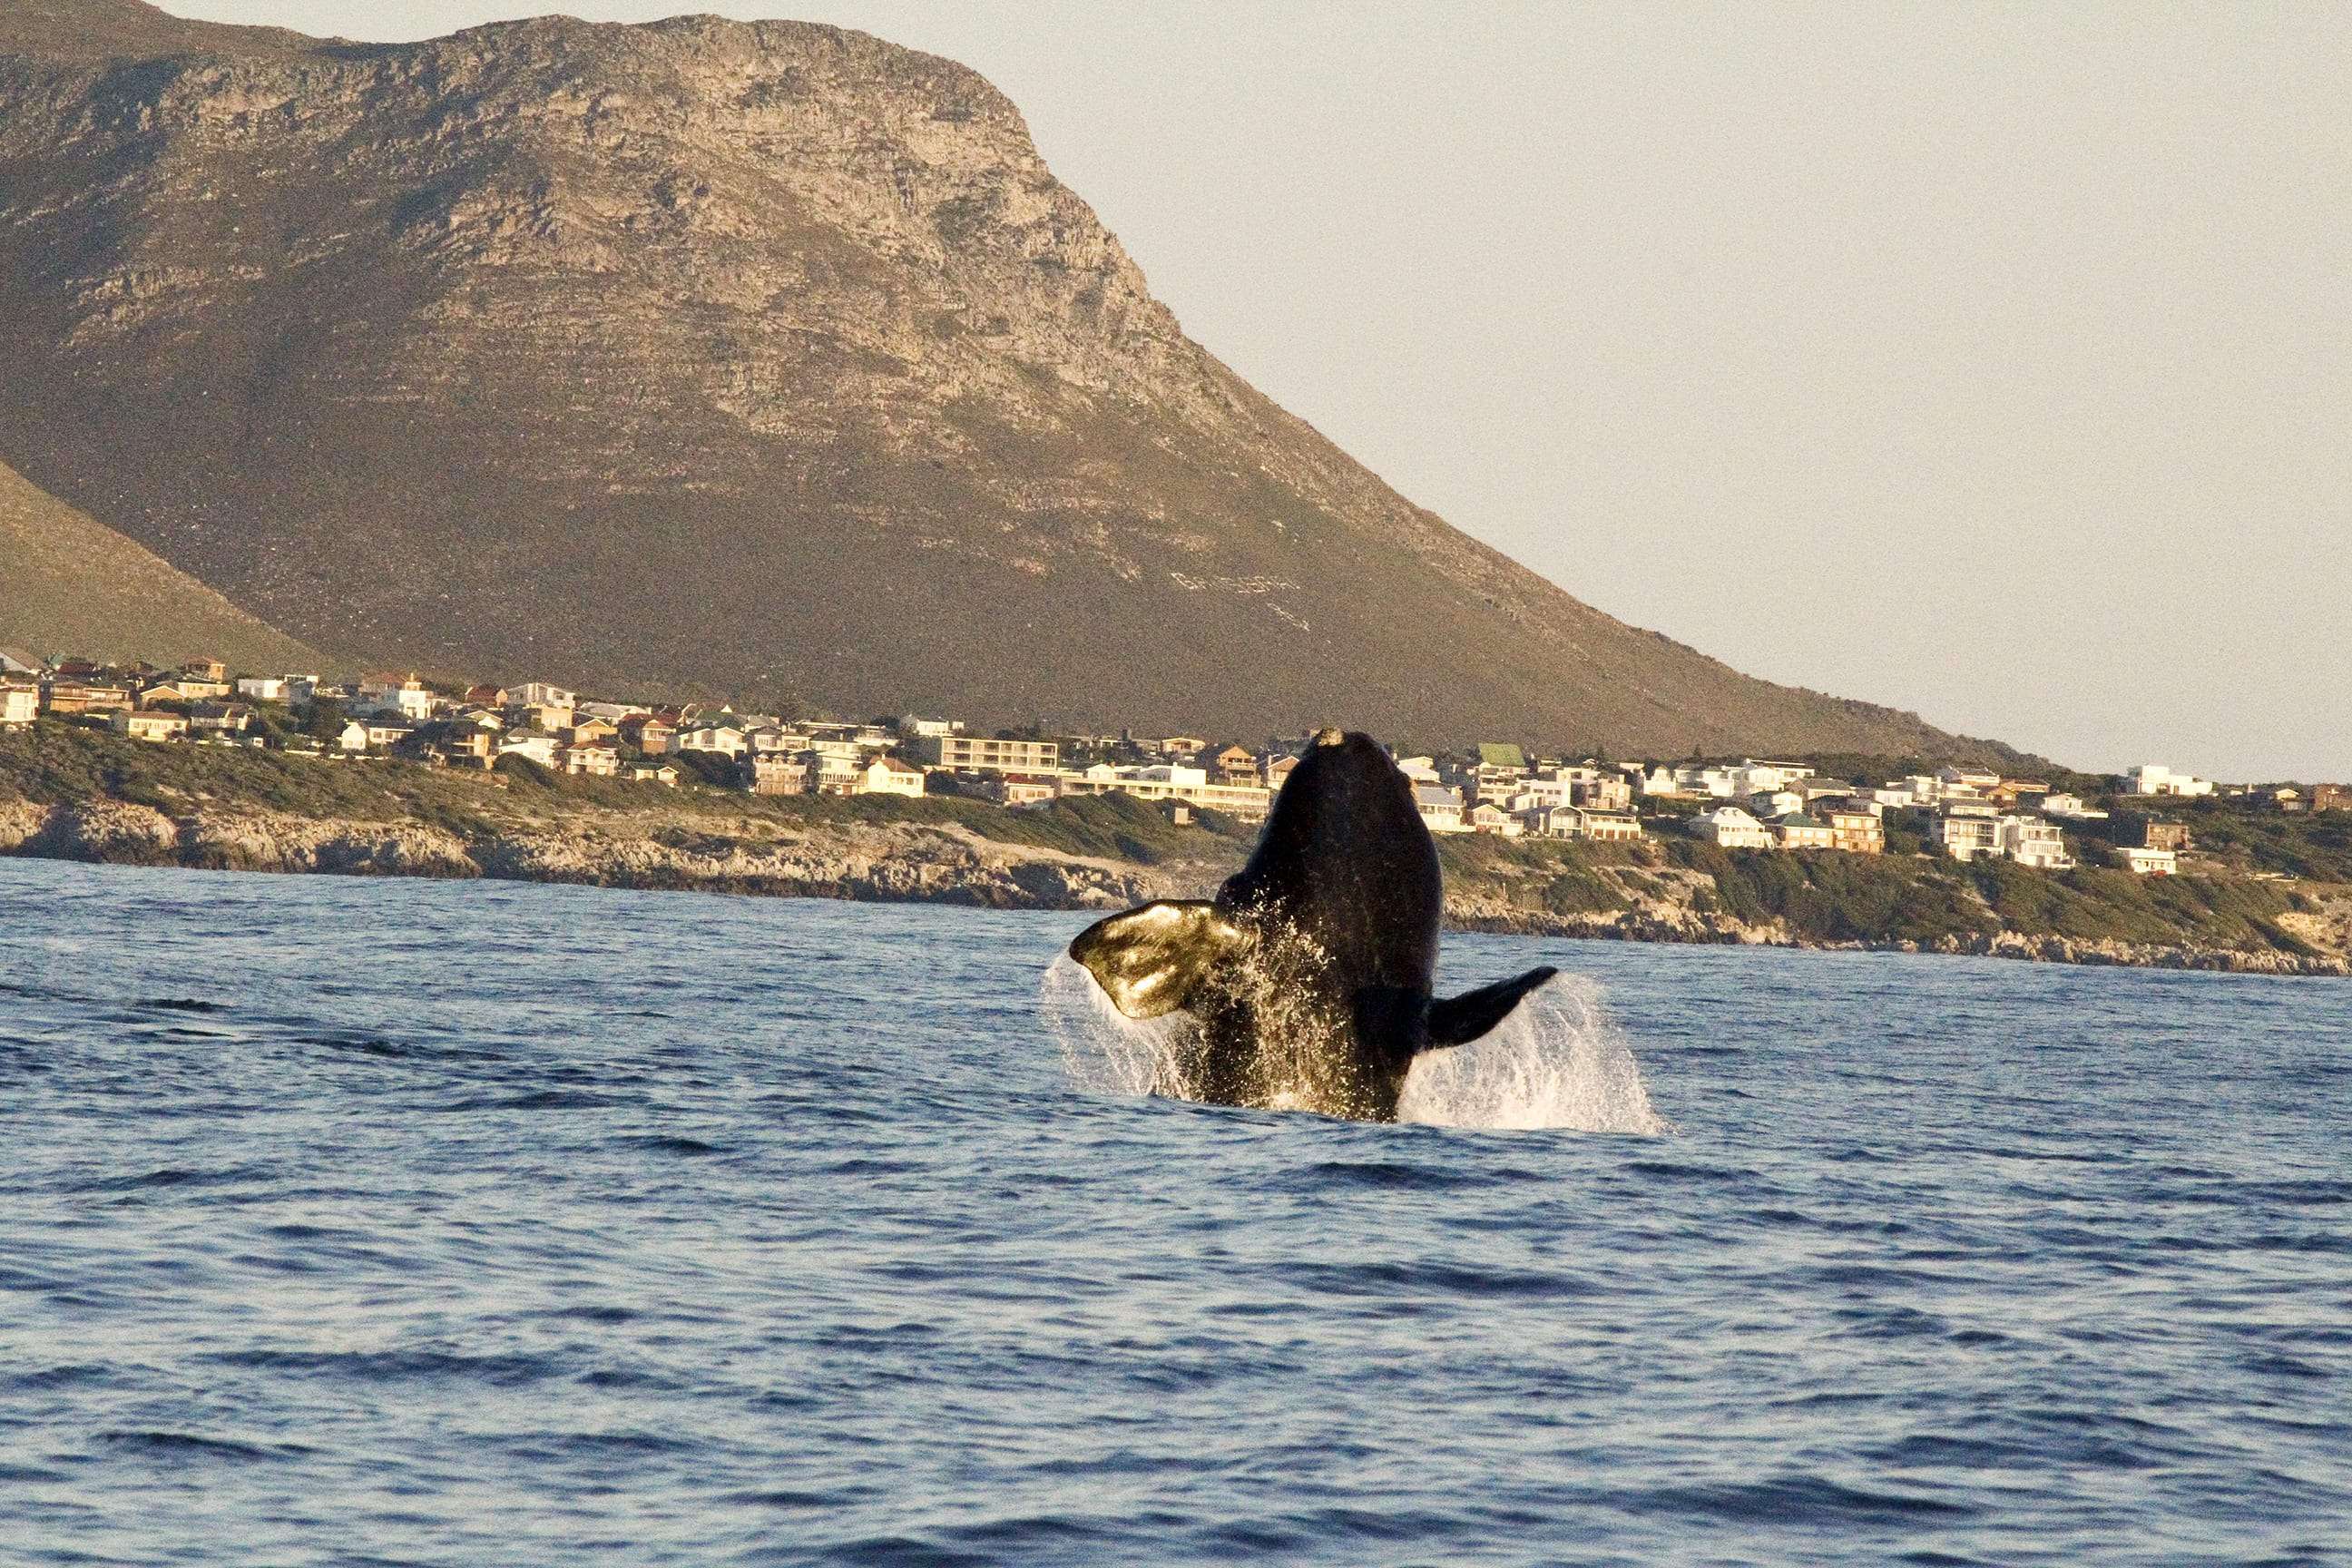 Southern right whale jumping out of water